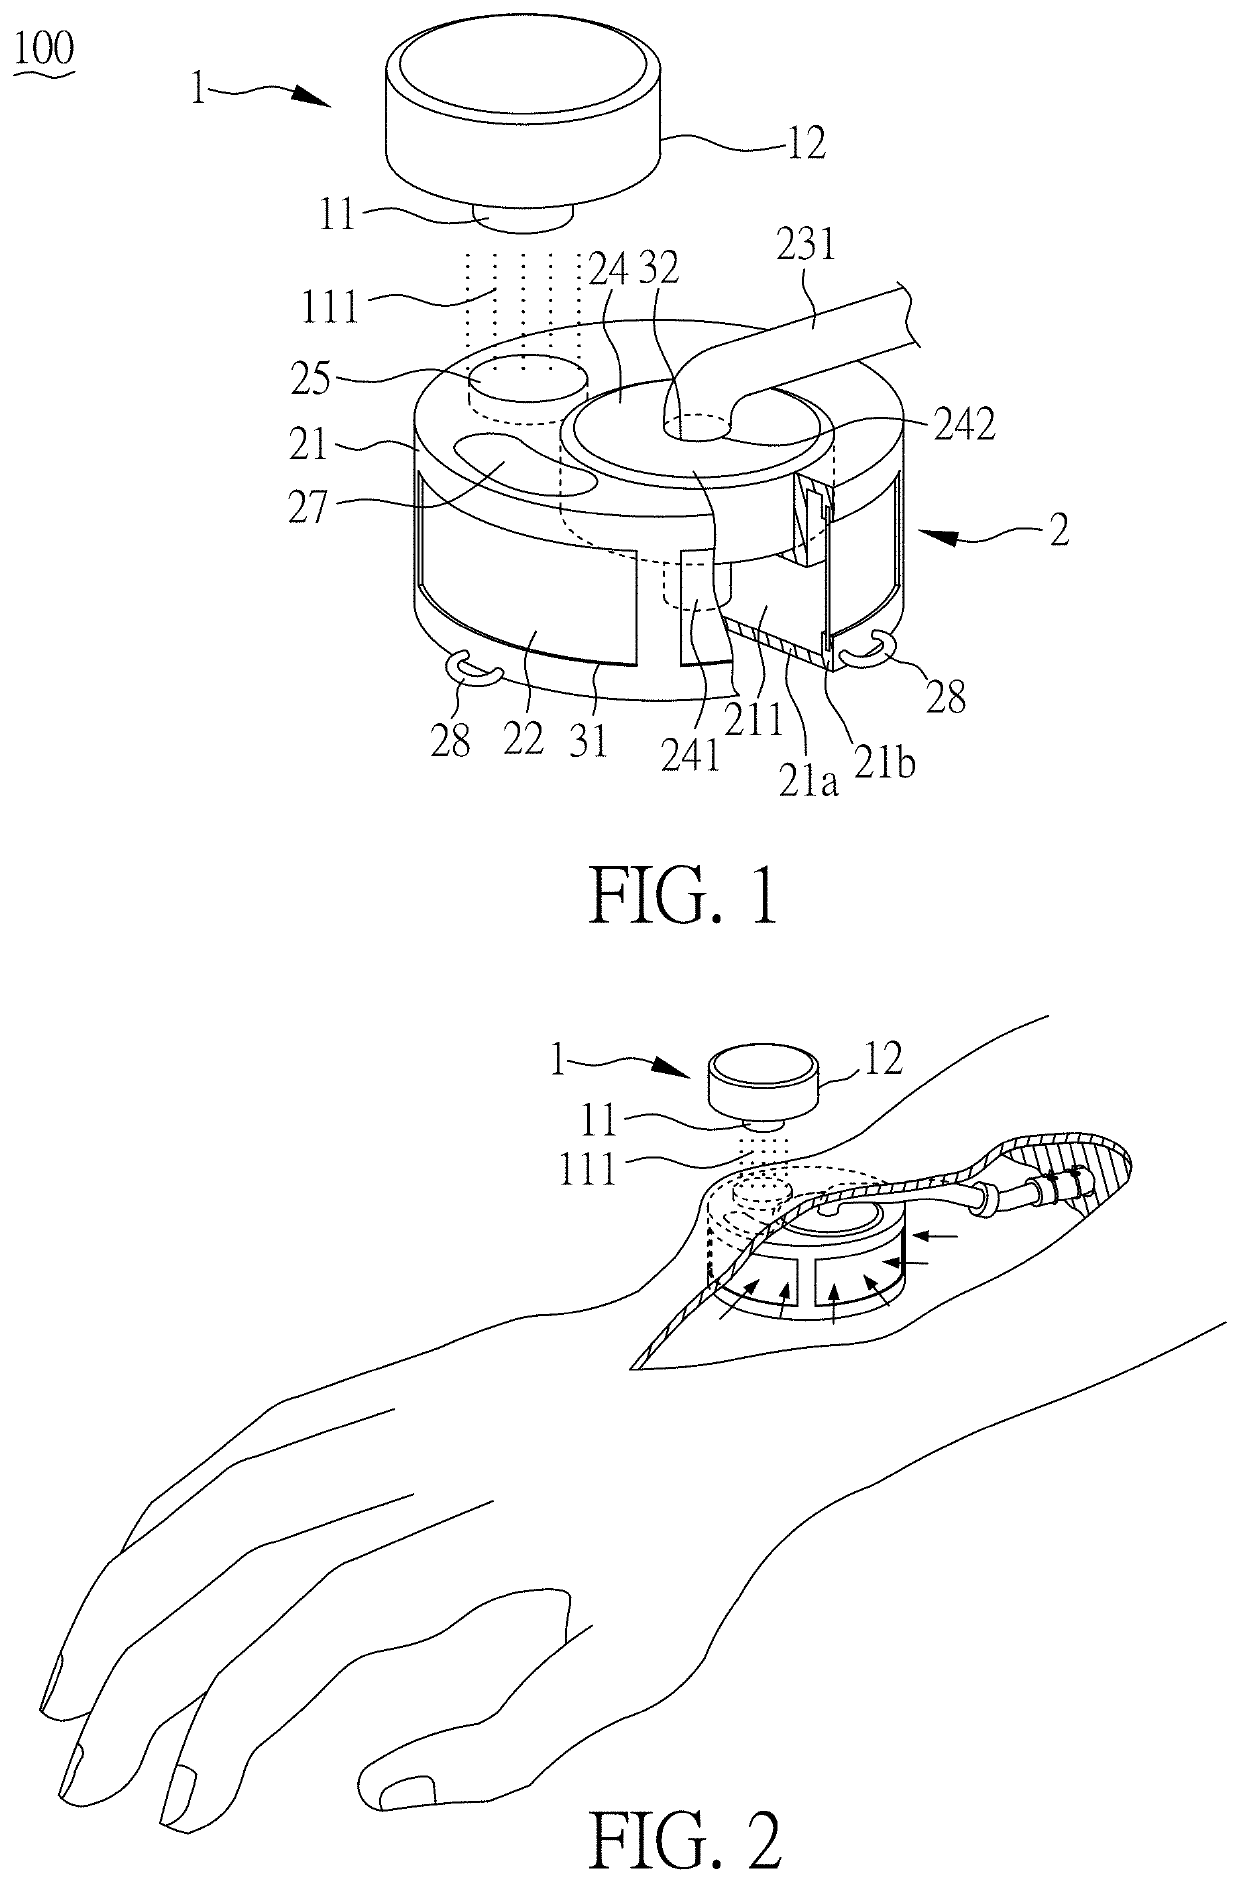 Apparatus for draining lymph into veins